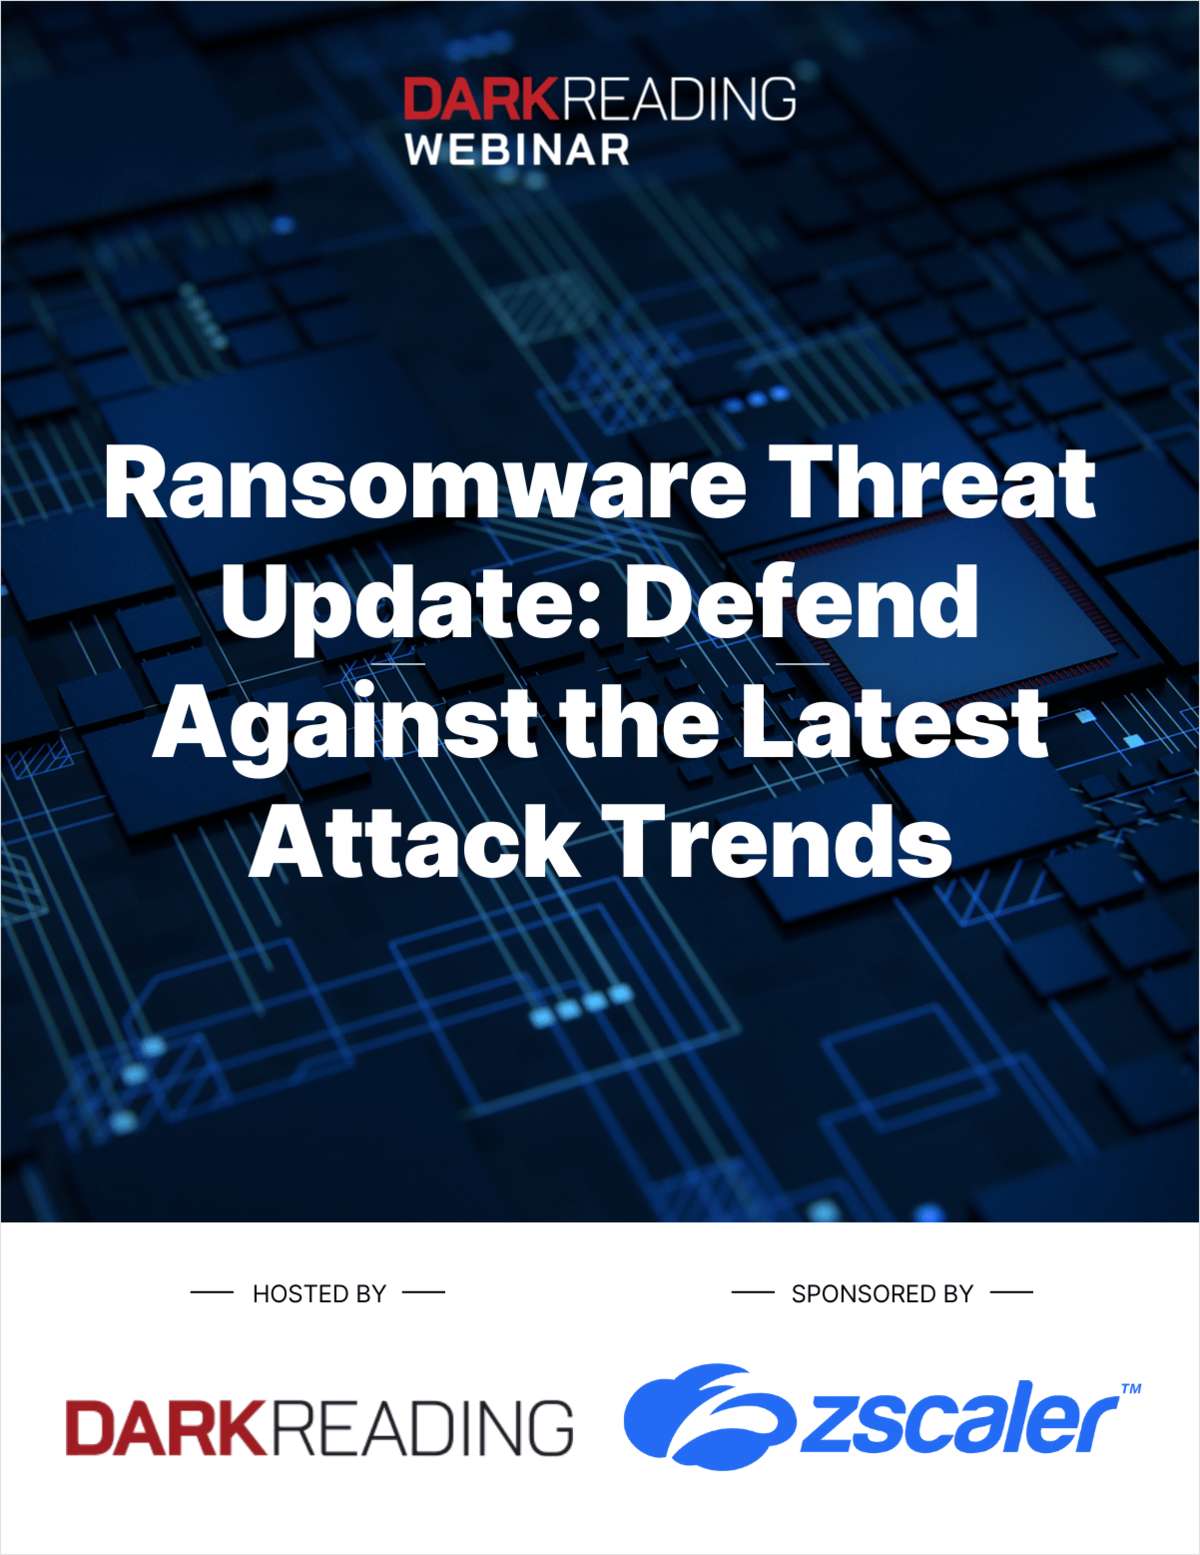 Ransomware Threat Update: Defend Against the Latest Attack Trends